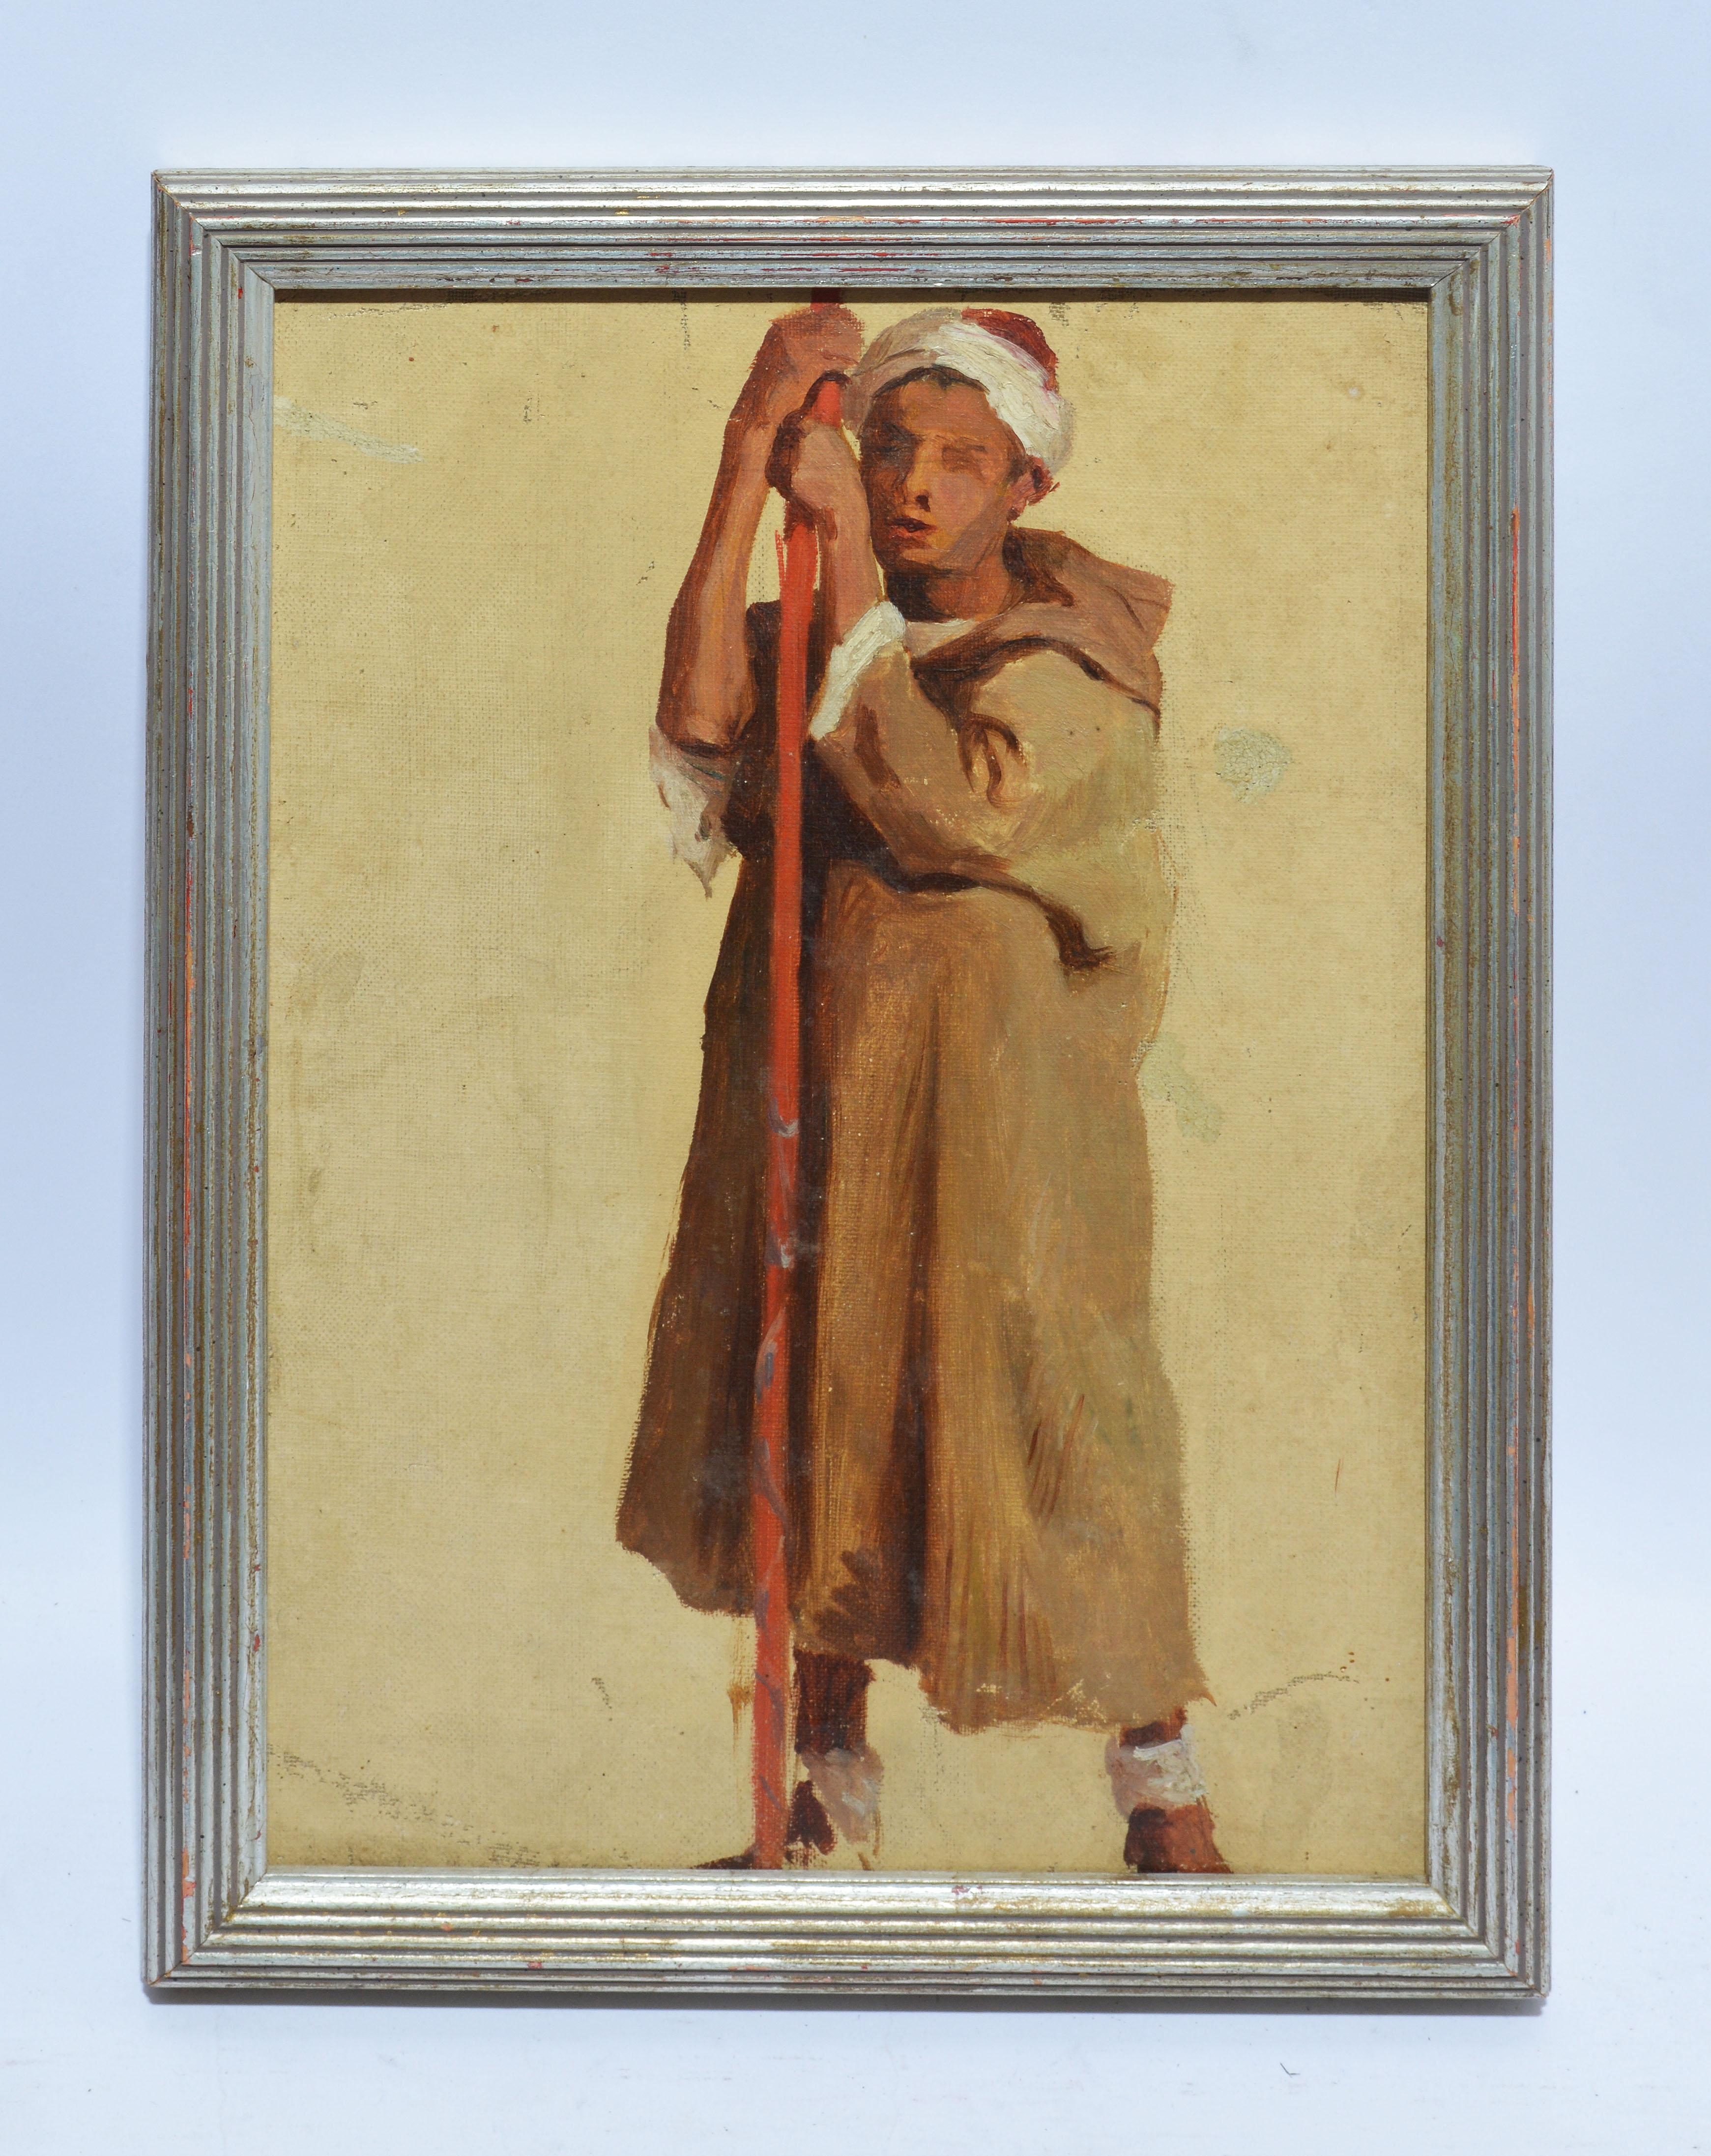 Antique Orientalist Oil Painting Portrait of Young Sheppard Man - Brown Abstract Painting by Unknown